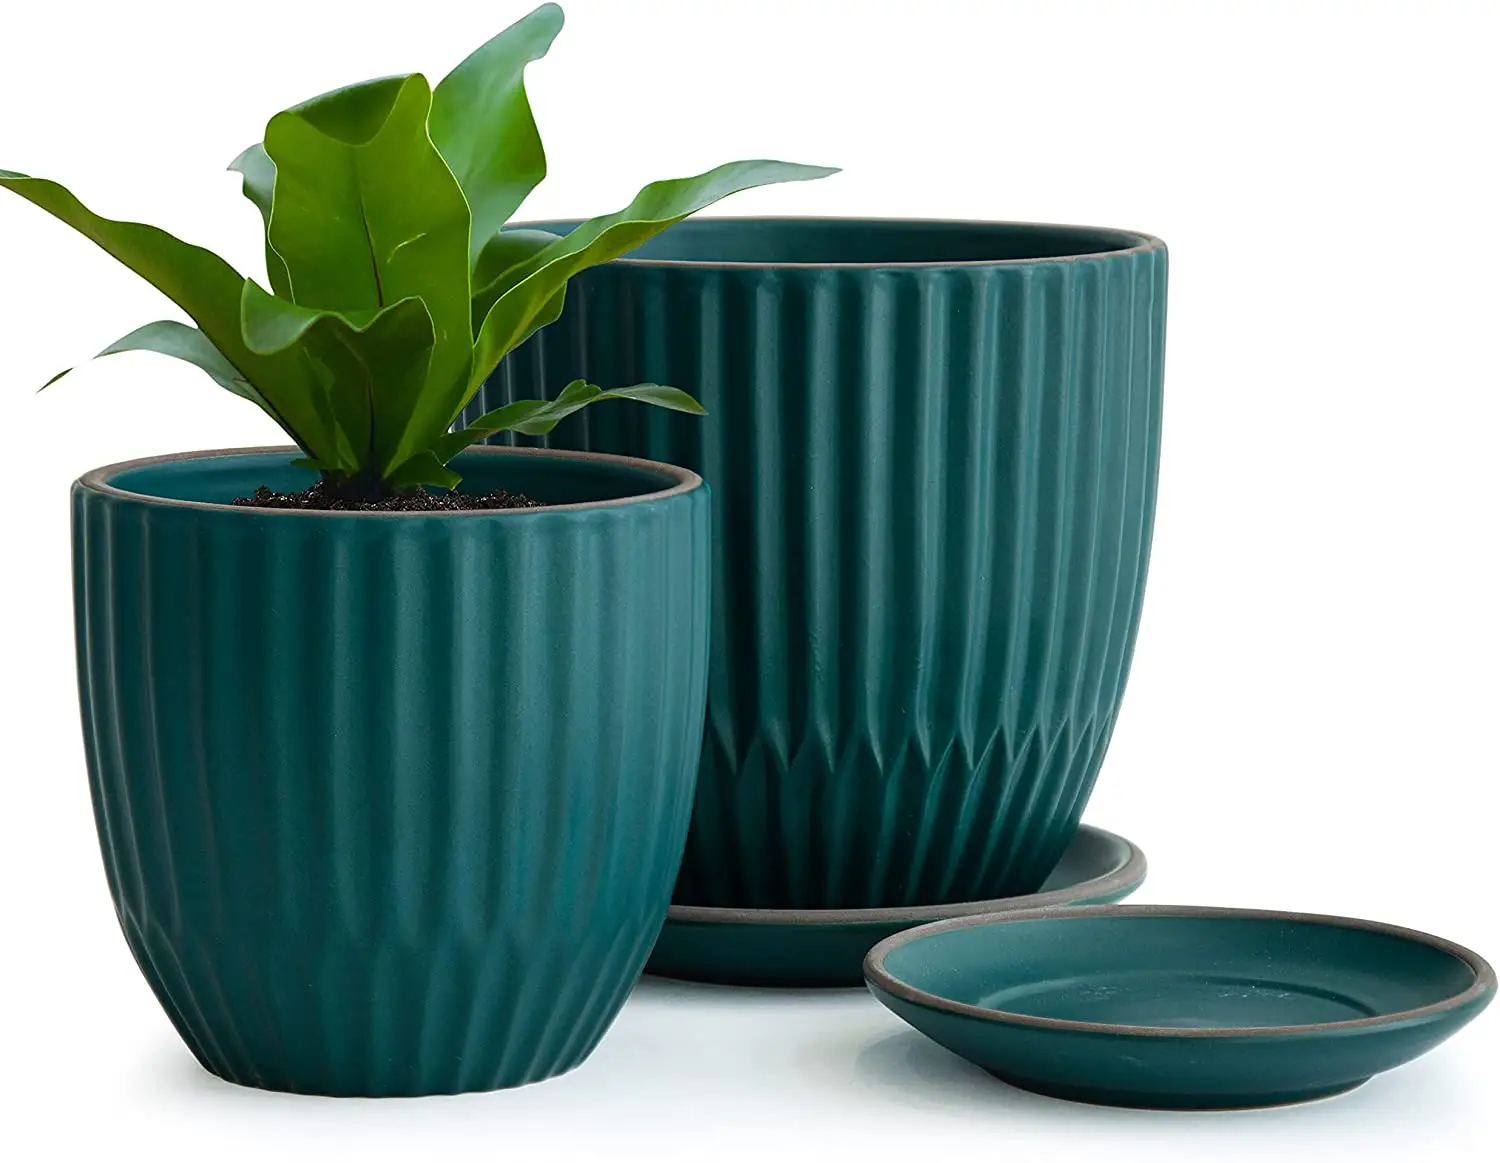 Set of 2 Resin Planter Pot resin Pot with Drainage Hole and Saucers 4 Inch & 6 Inch, Teal Blue